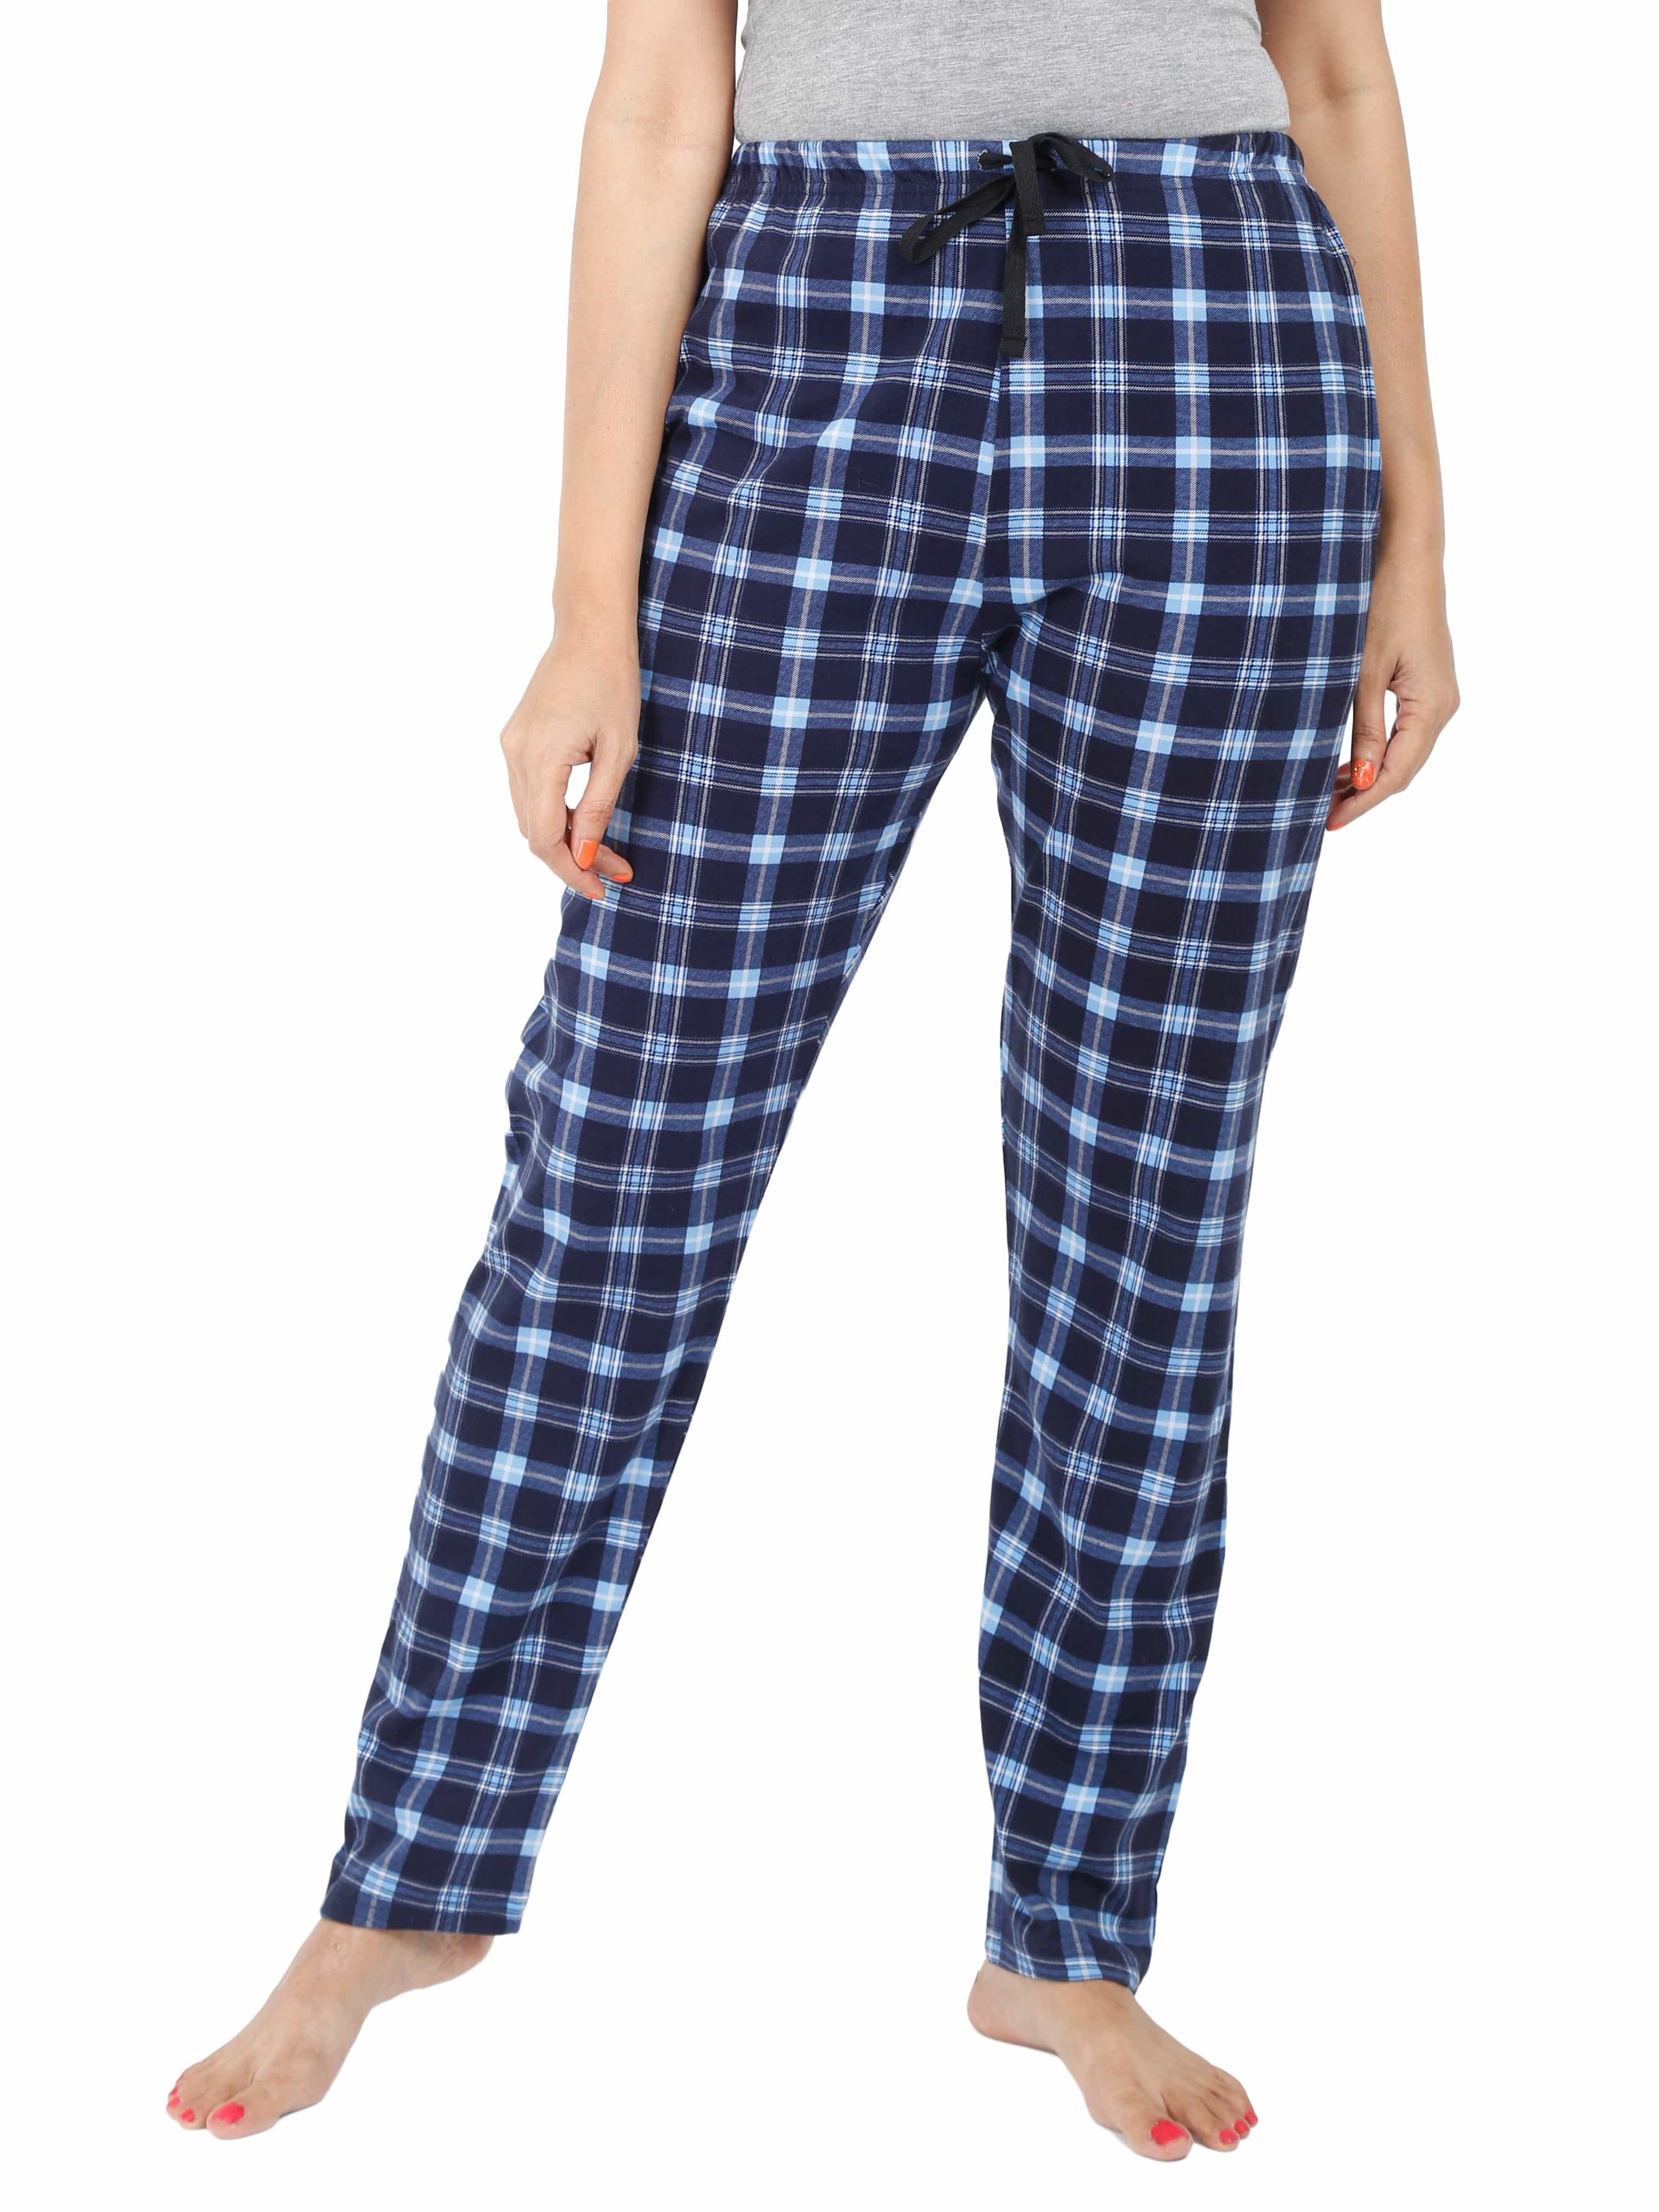 Mid-Night Blue Basket Jacket + Navy/Red Check Pants - JBD Clothiers